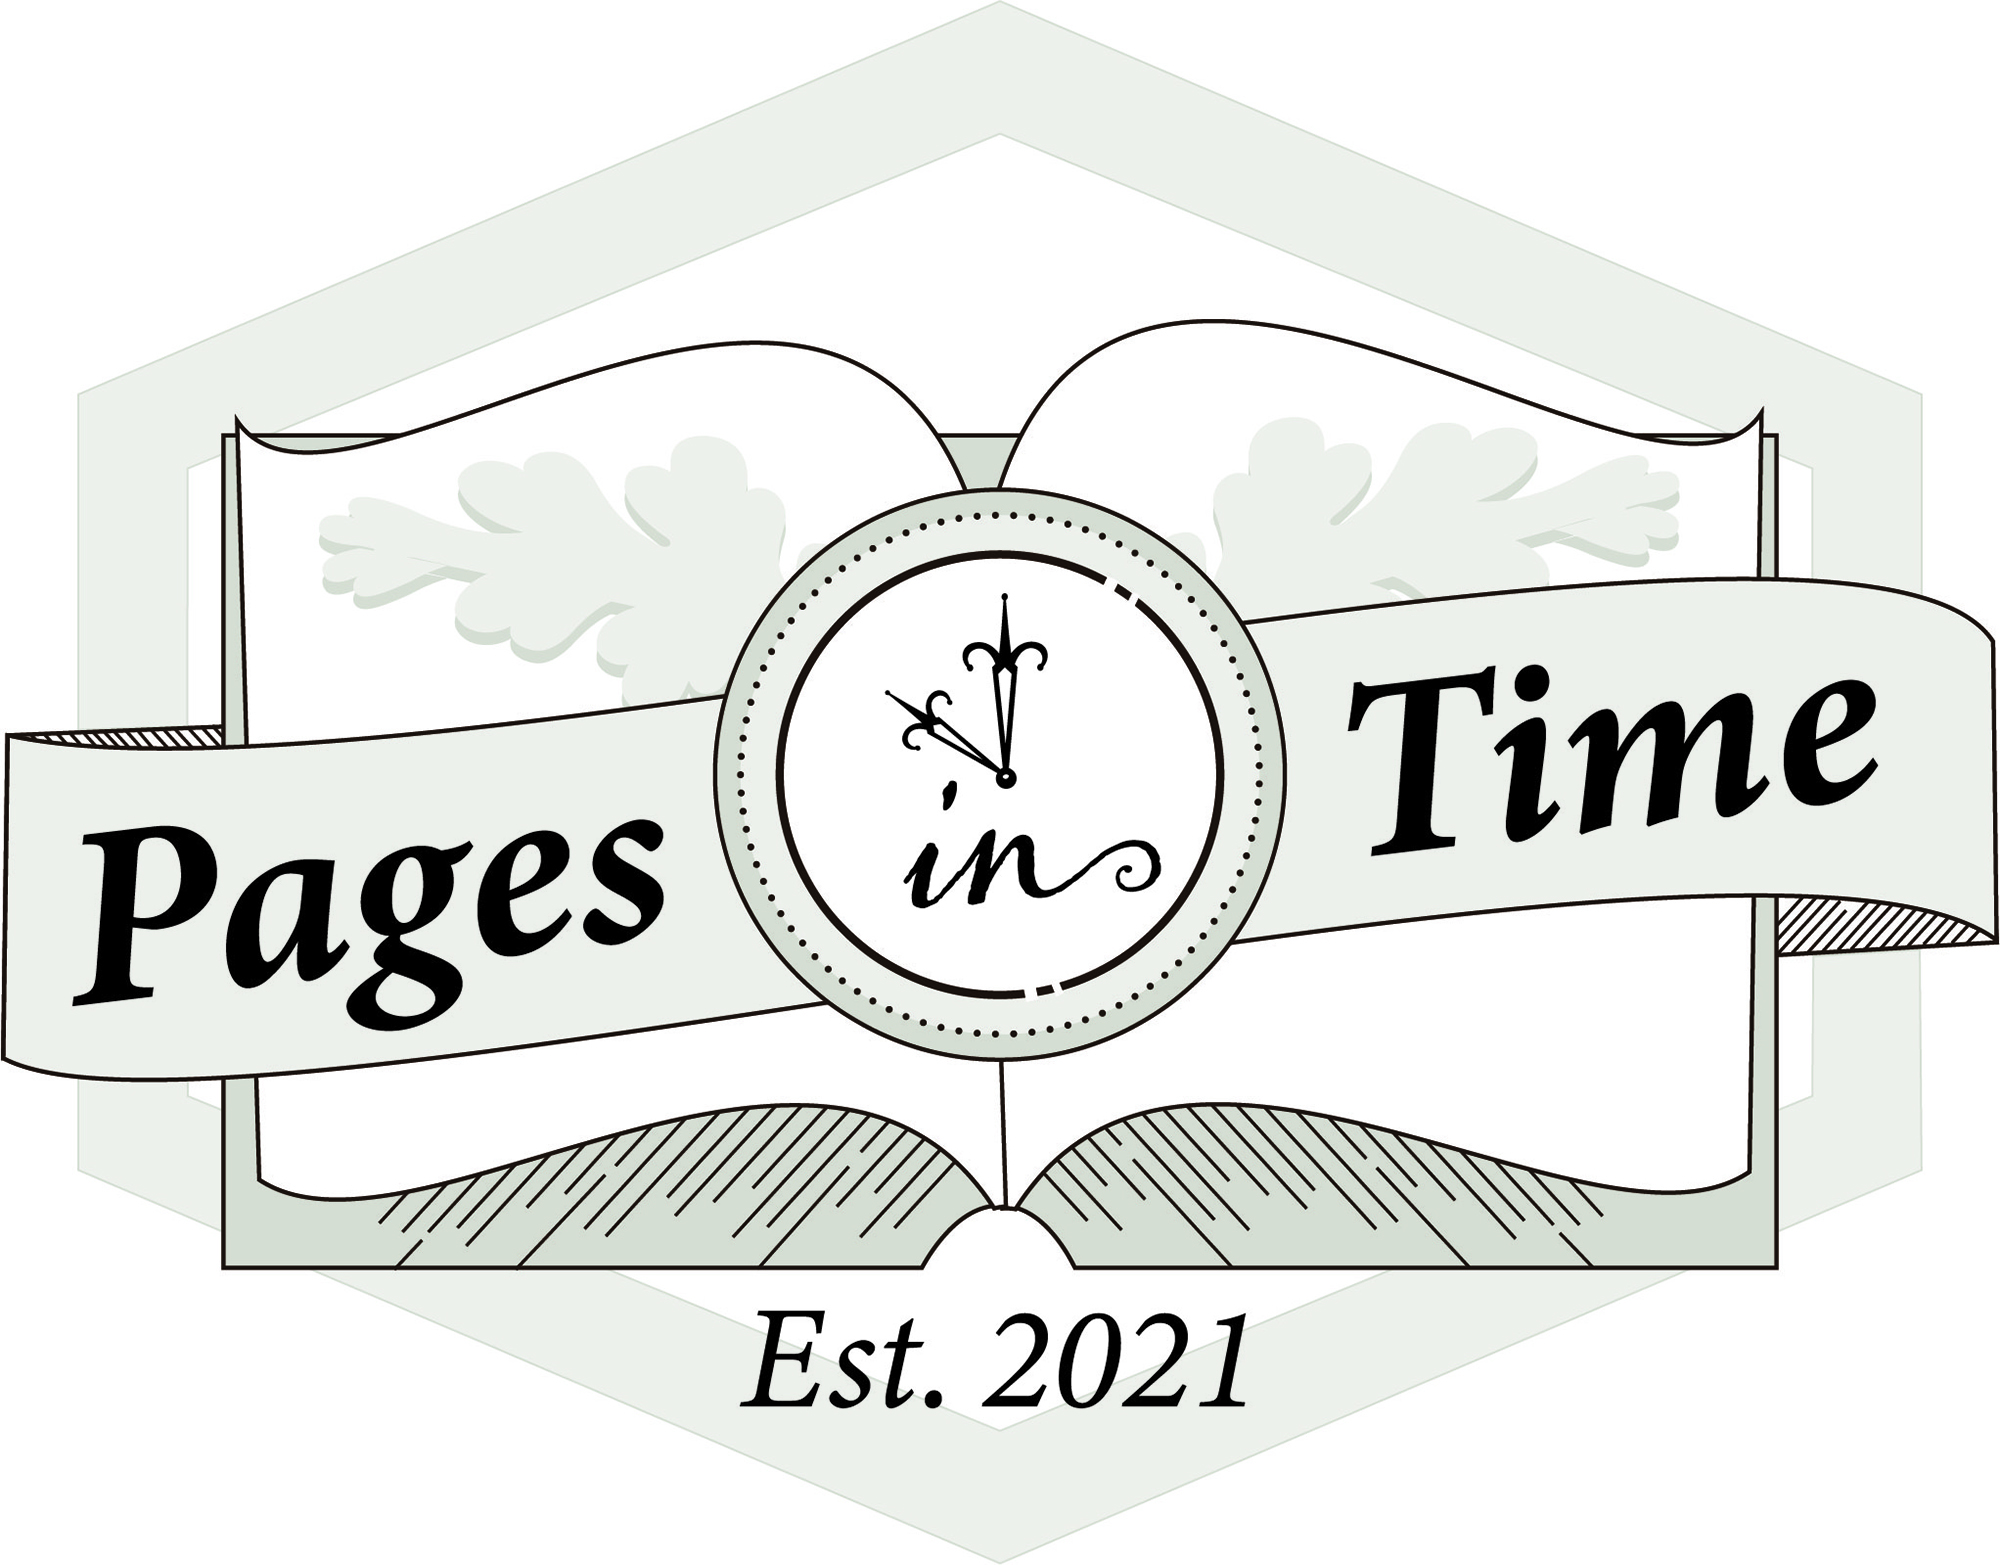 <b>Pages in Time Logo</b><br><i>Created using Illustrator.</i> This logo was designed as a modern take on quaint for a business located in a small, tourist community.